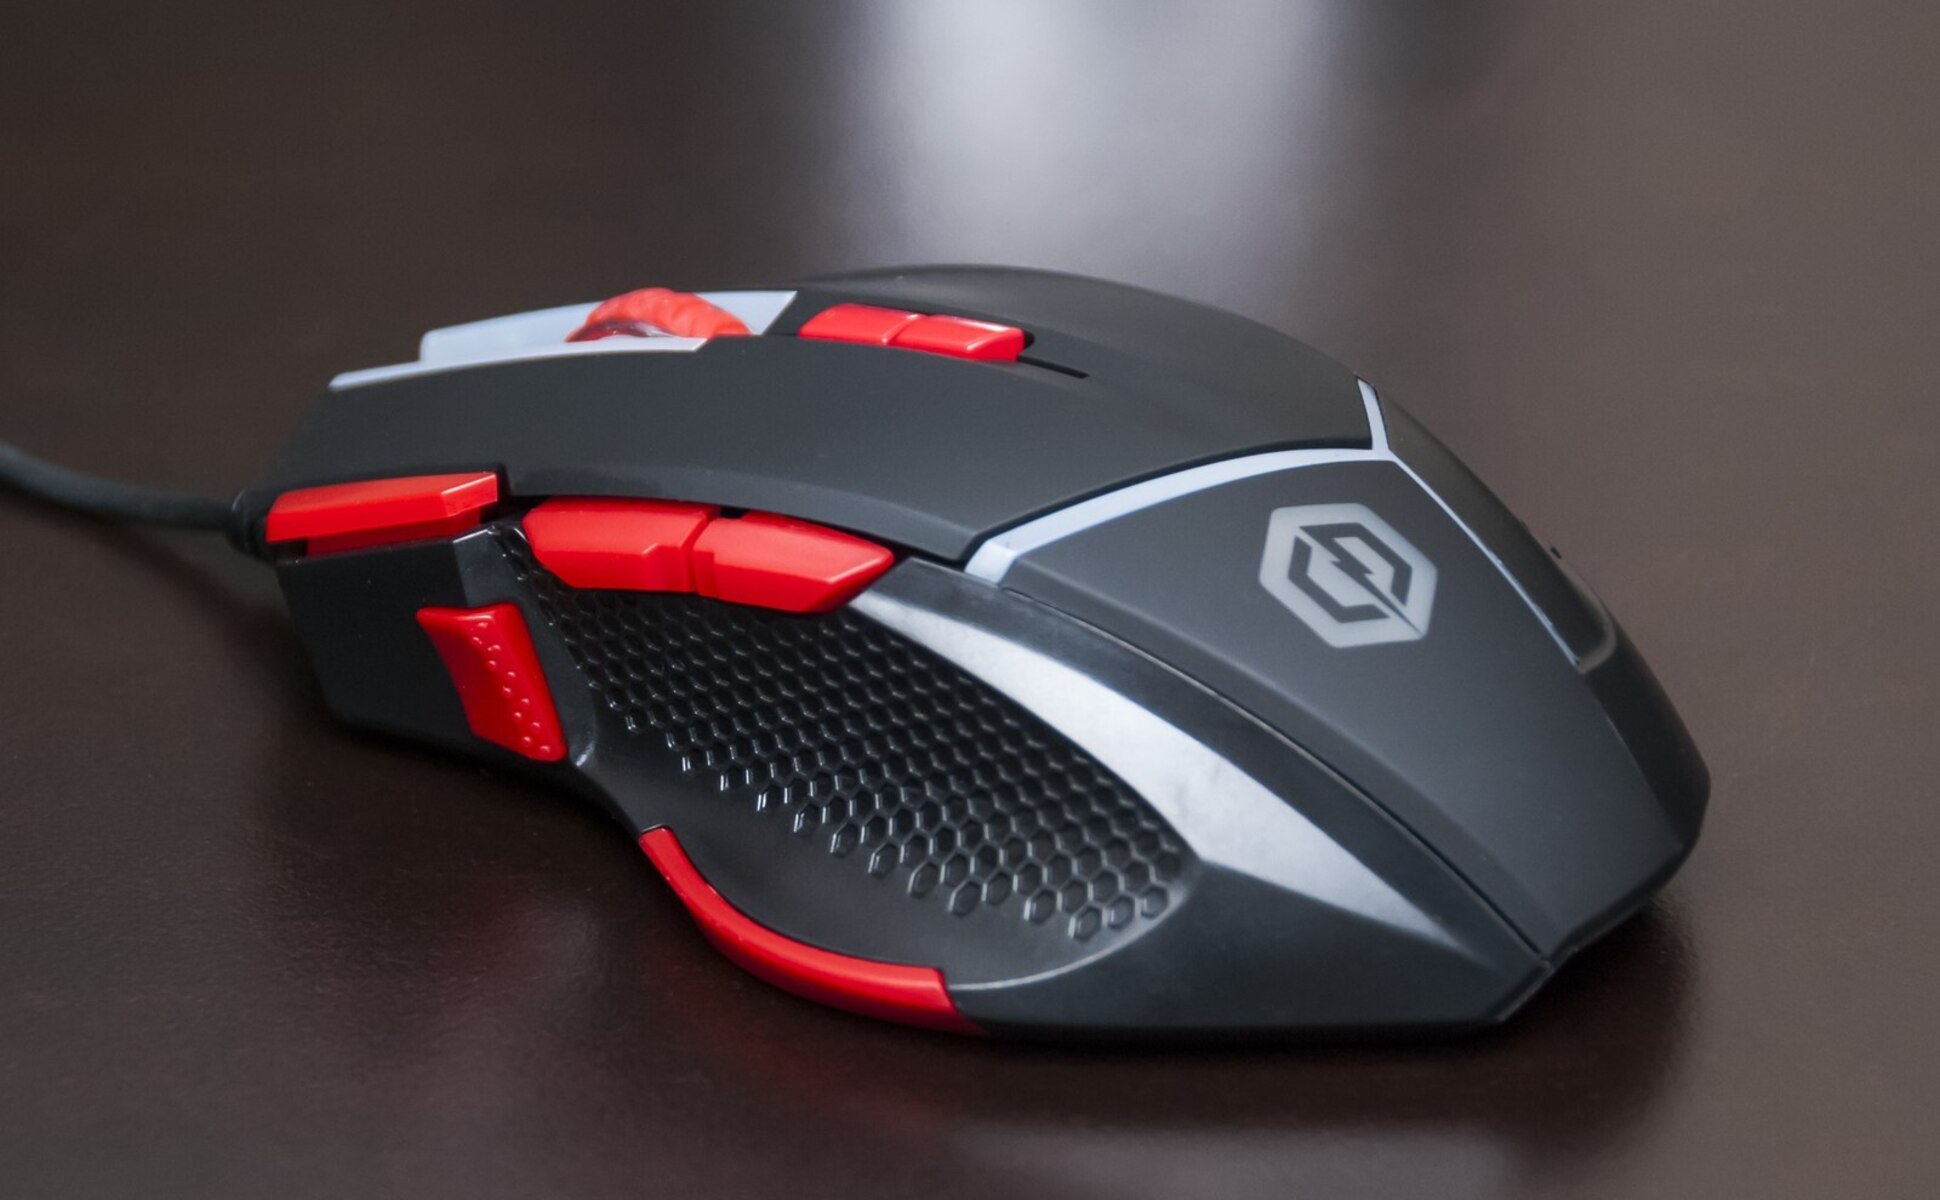 CyberpowerPC Gaming Mouse: How To Change Weight